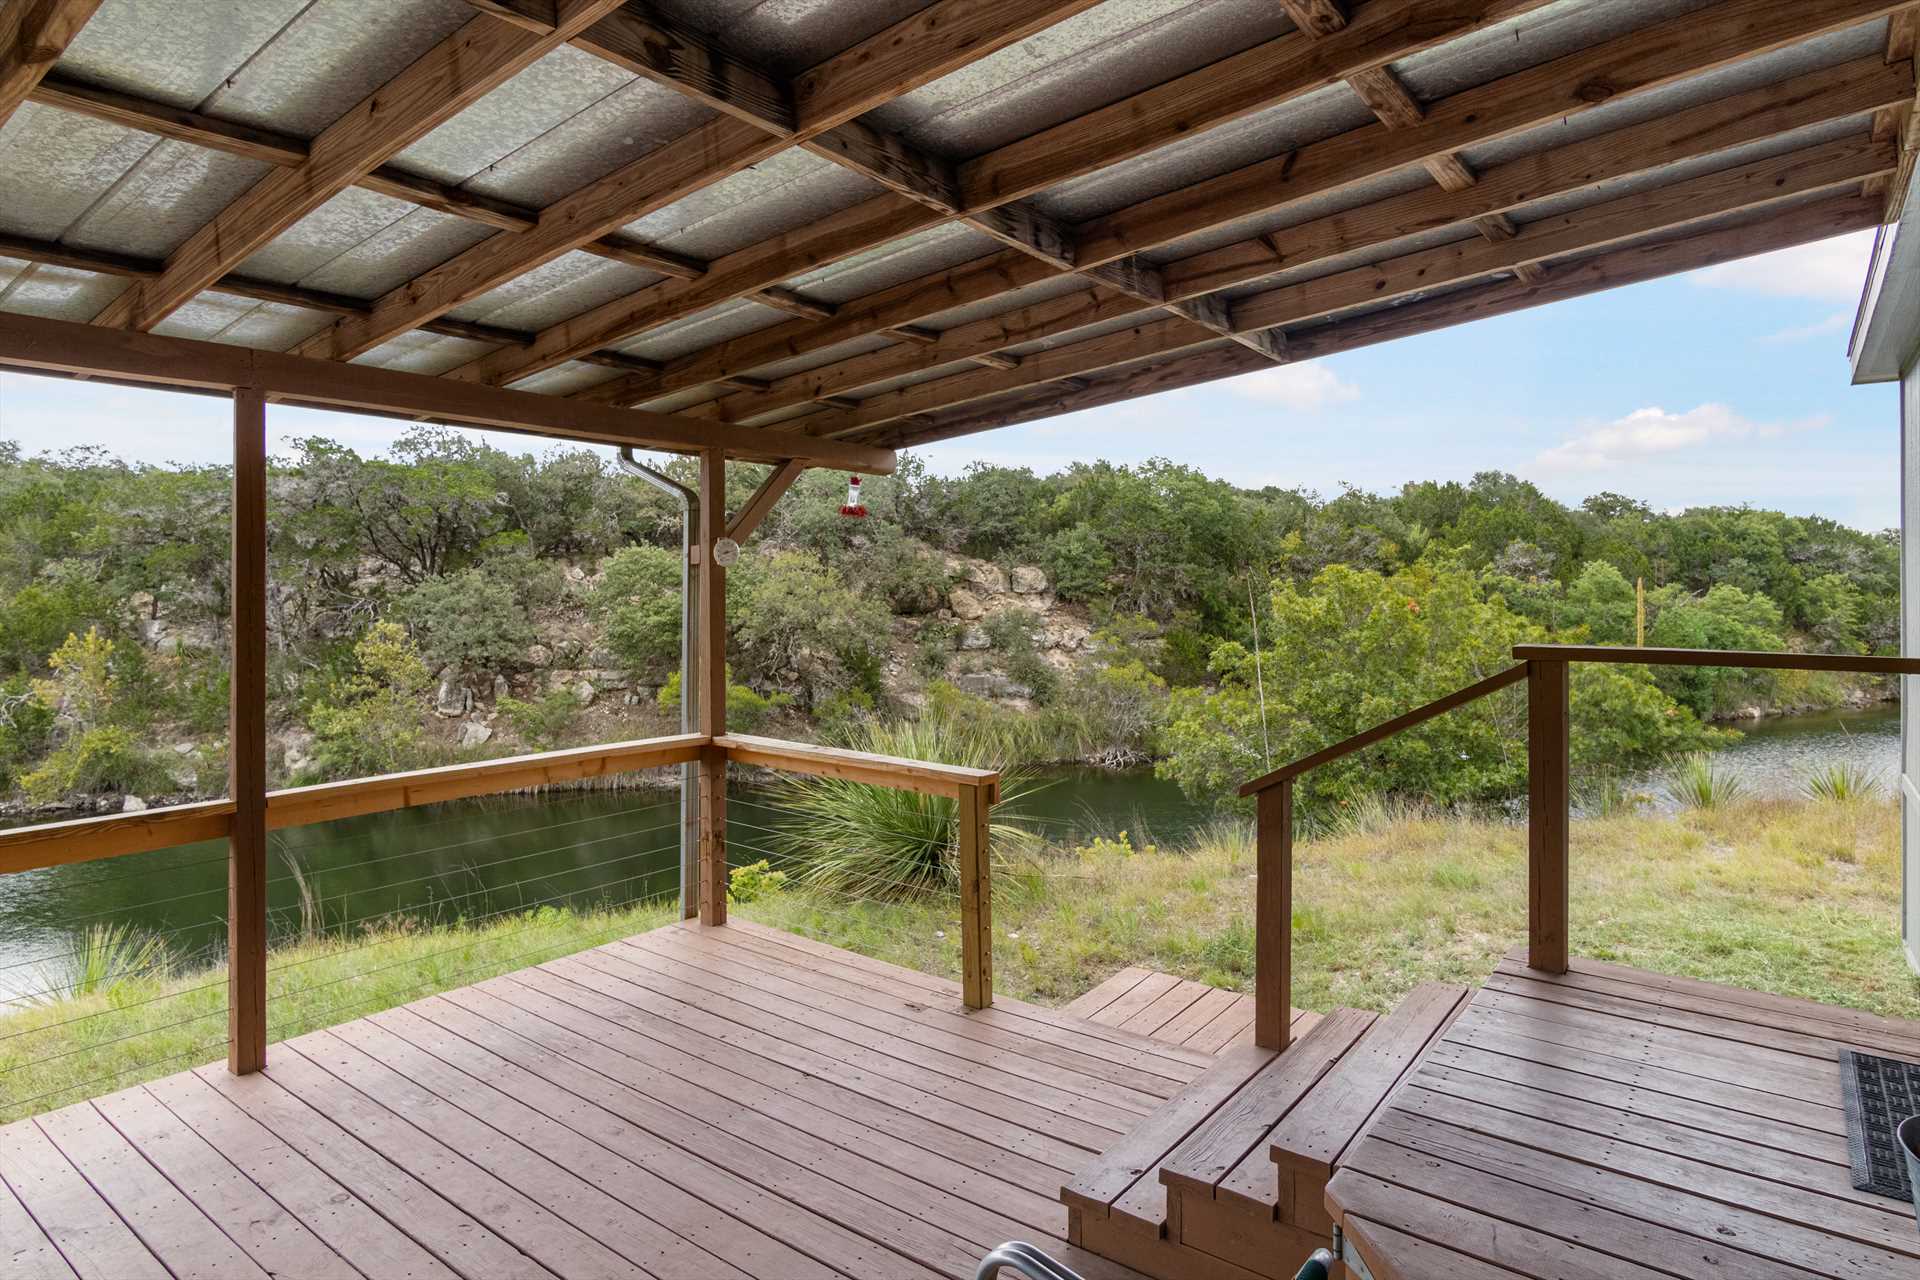                                                 Take a deep breath, and you can almost taste the fresh Hill Country air!